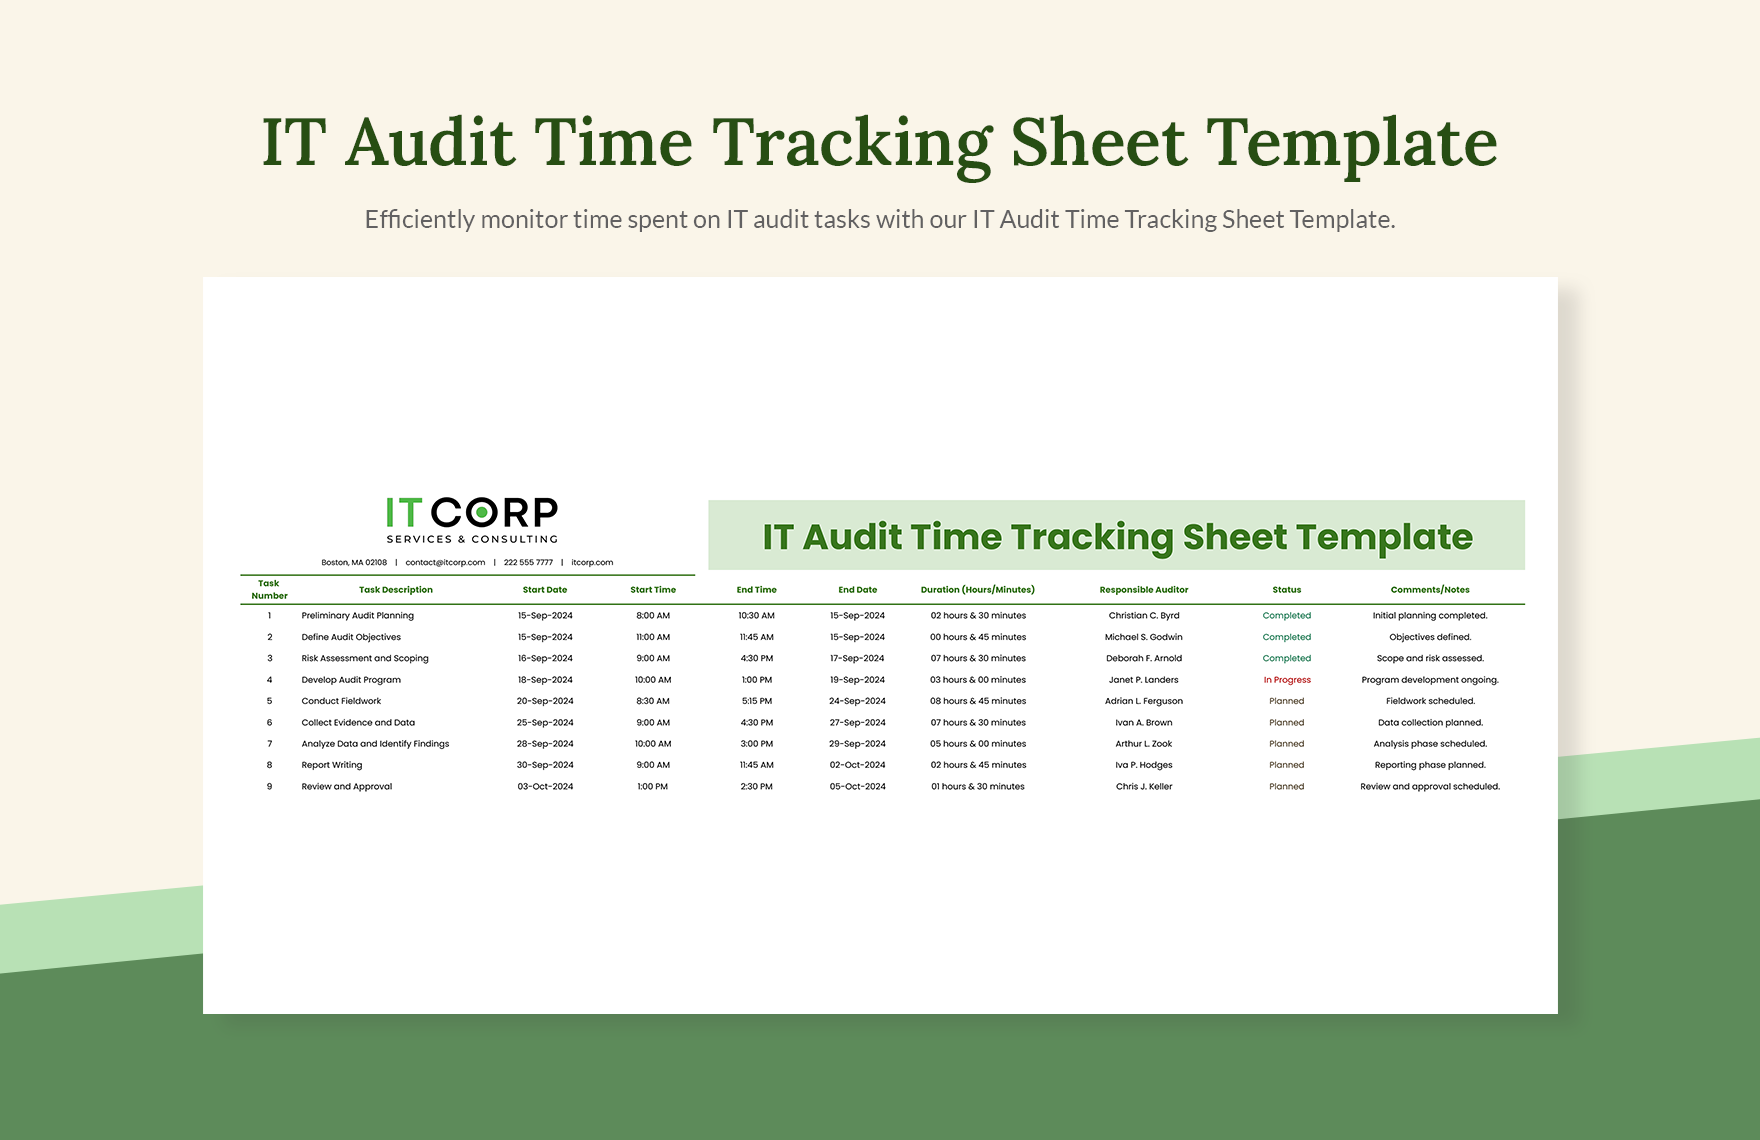 IT Audit Time Tracking Sheet Template in Excel, Google Sheets